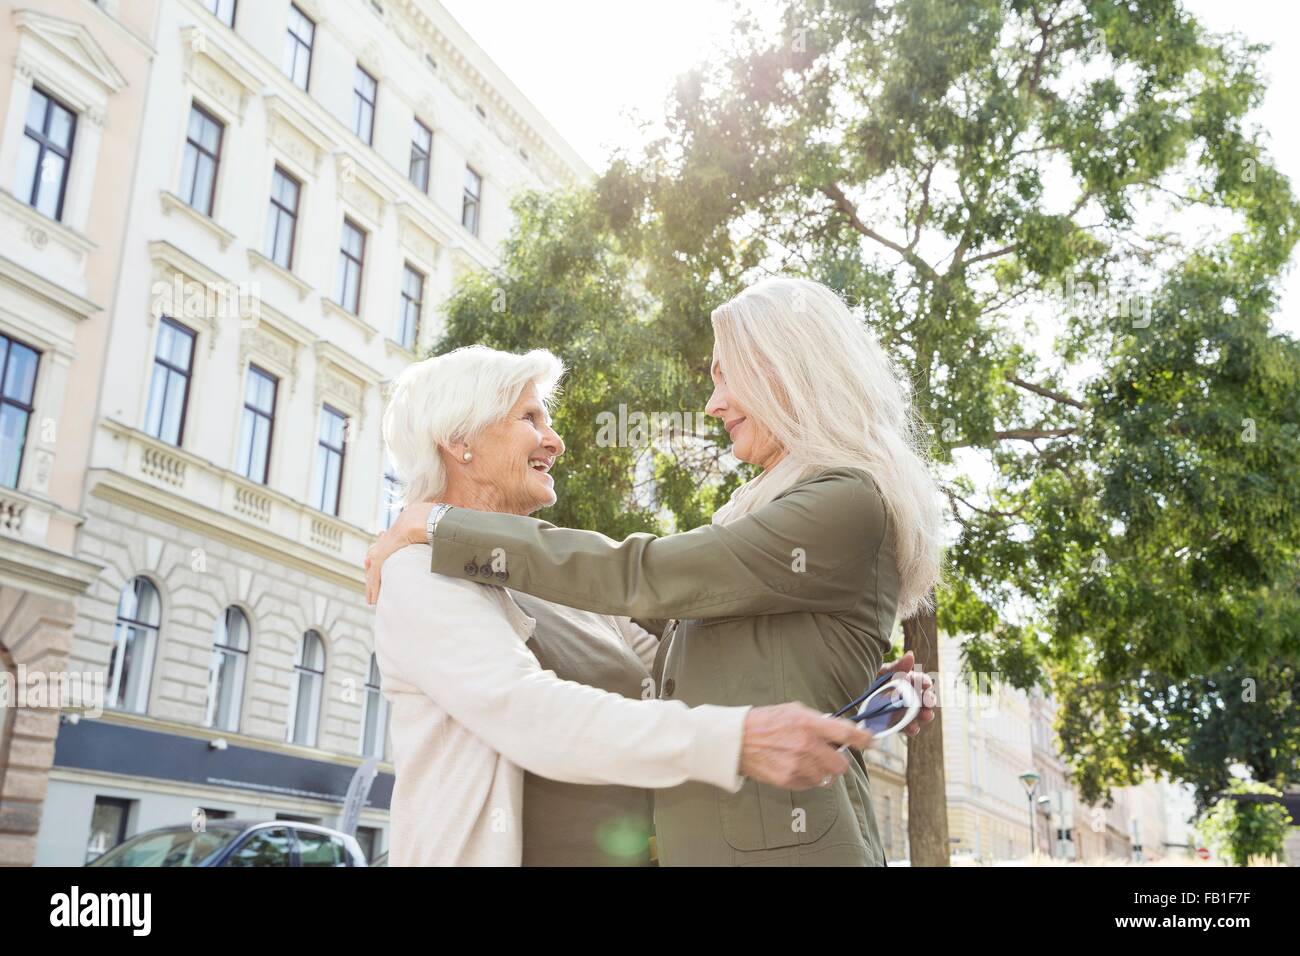 Mother and Daughter hugging in street, smiling Banque D'Images